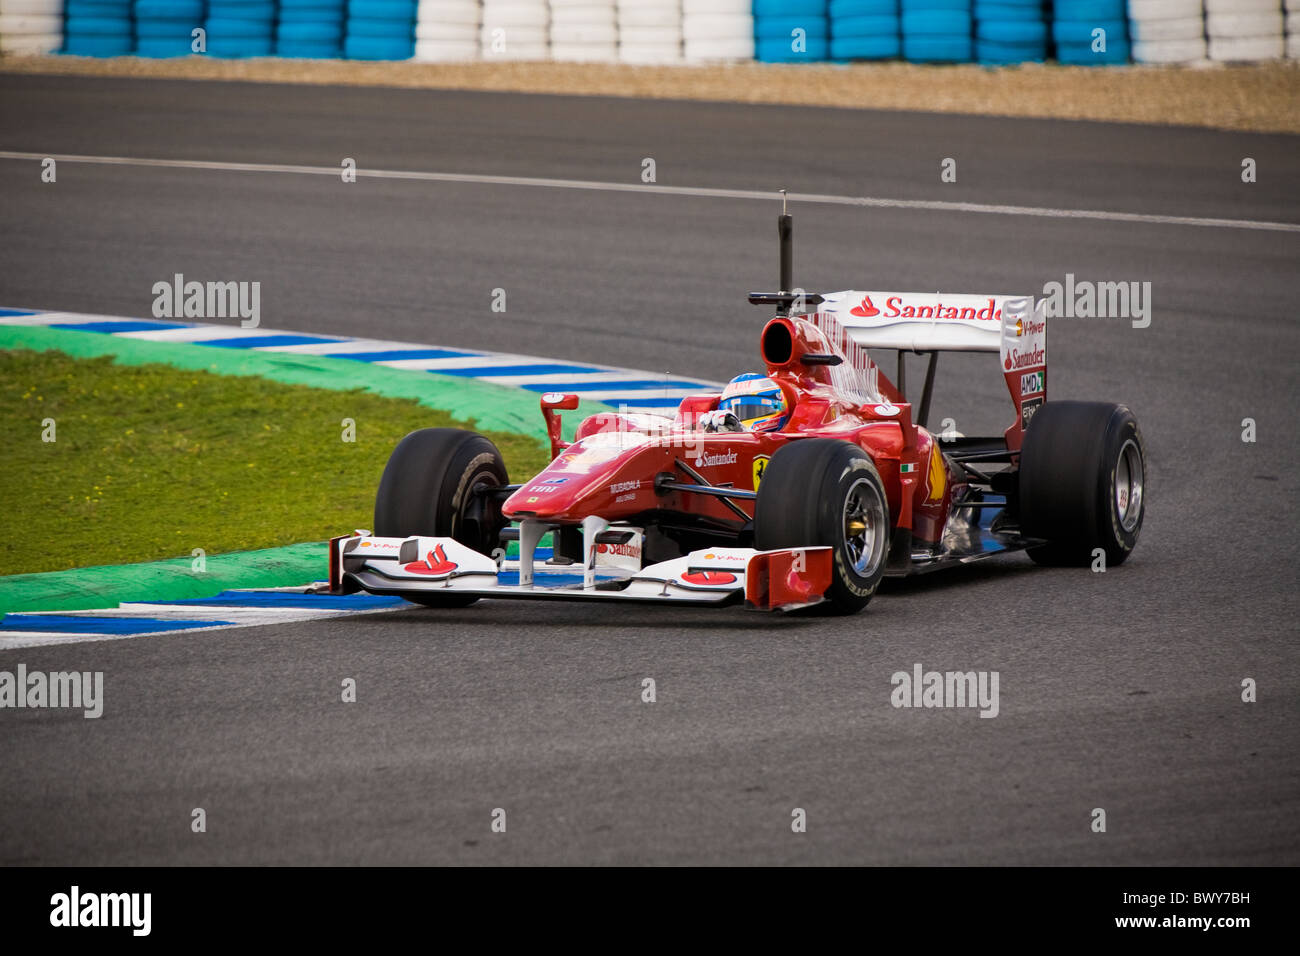 Fernando Alonso at the 2010 Jerez practice in his FERRARI, Formula 1 car at the  practice, spain Stock Photo